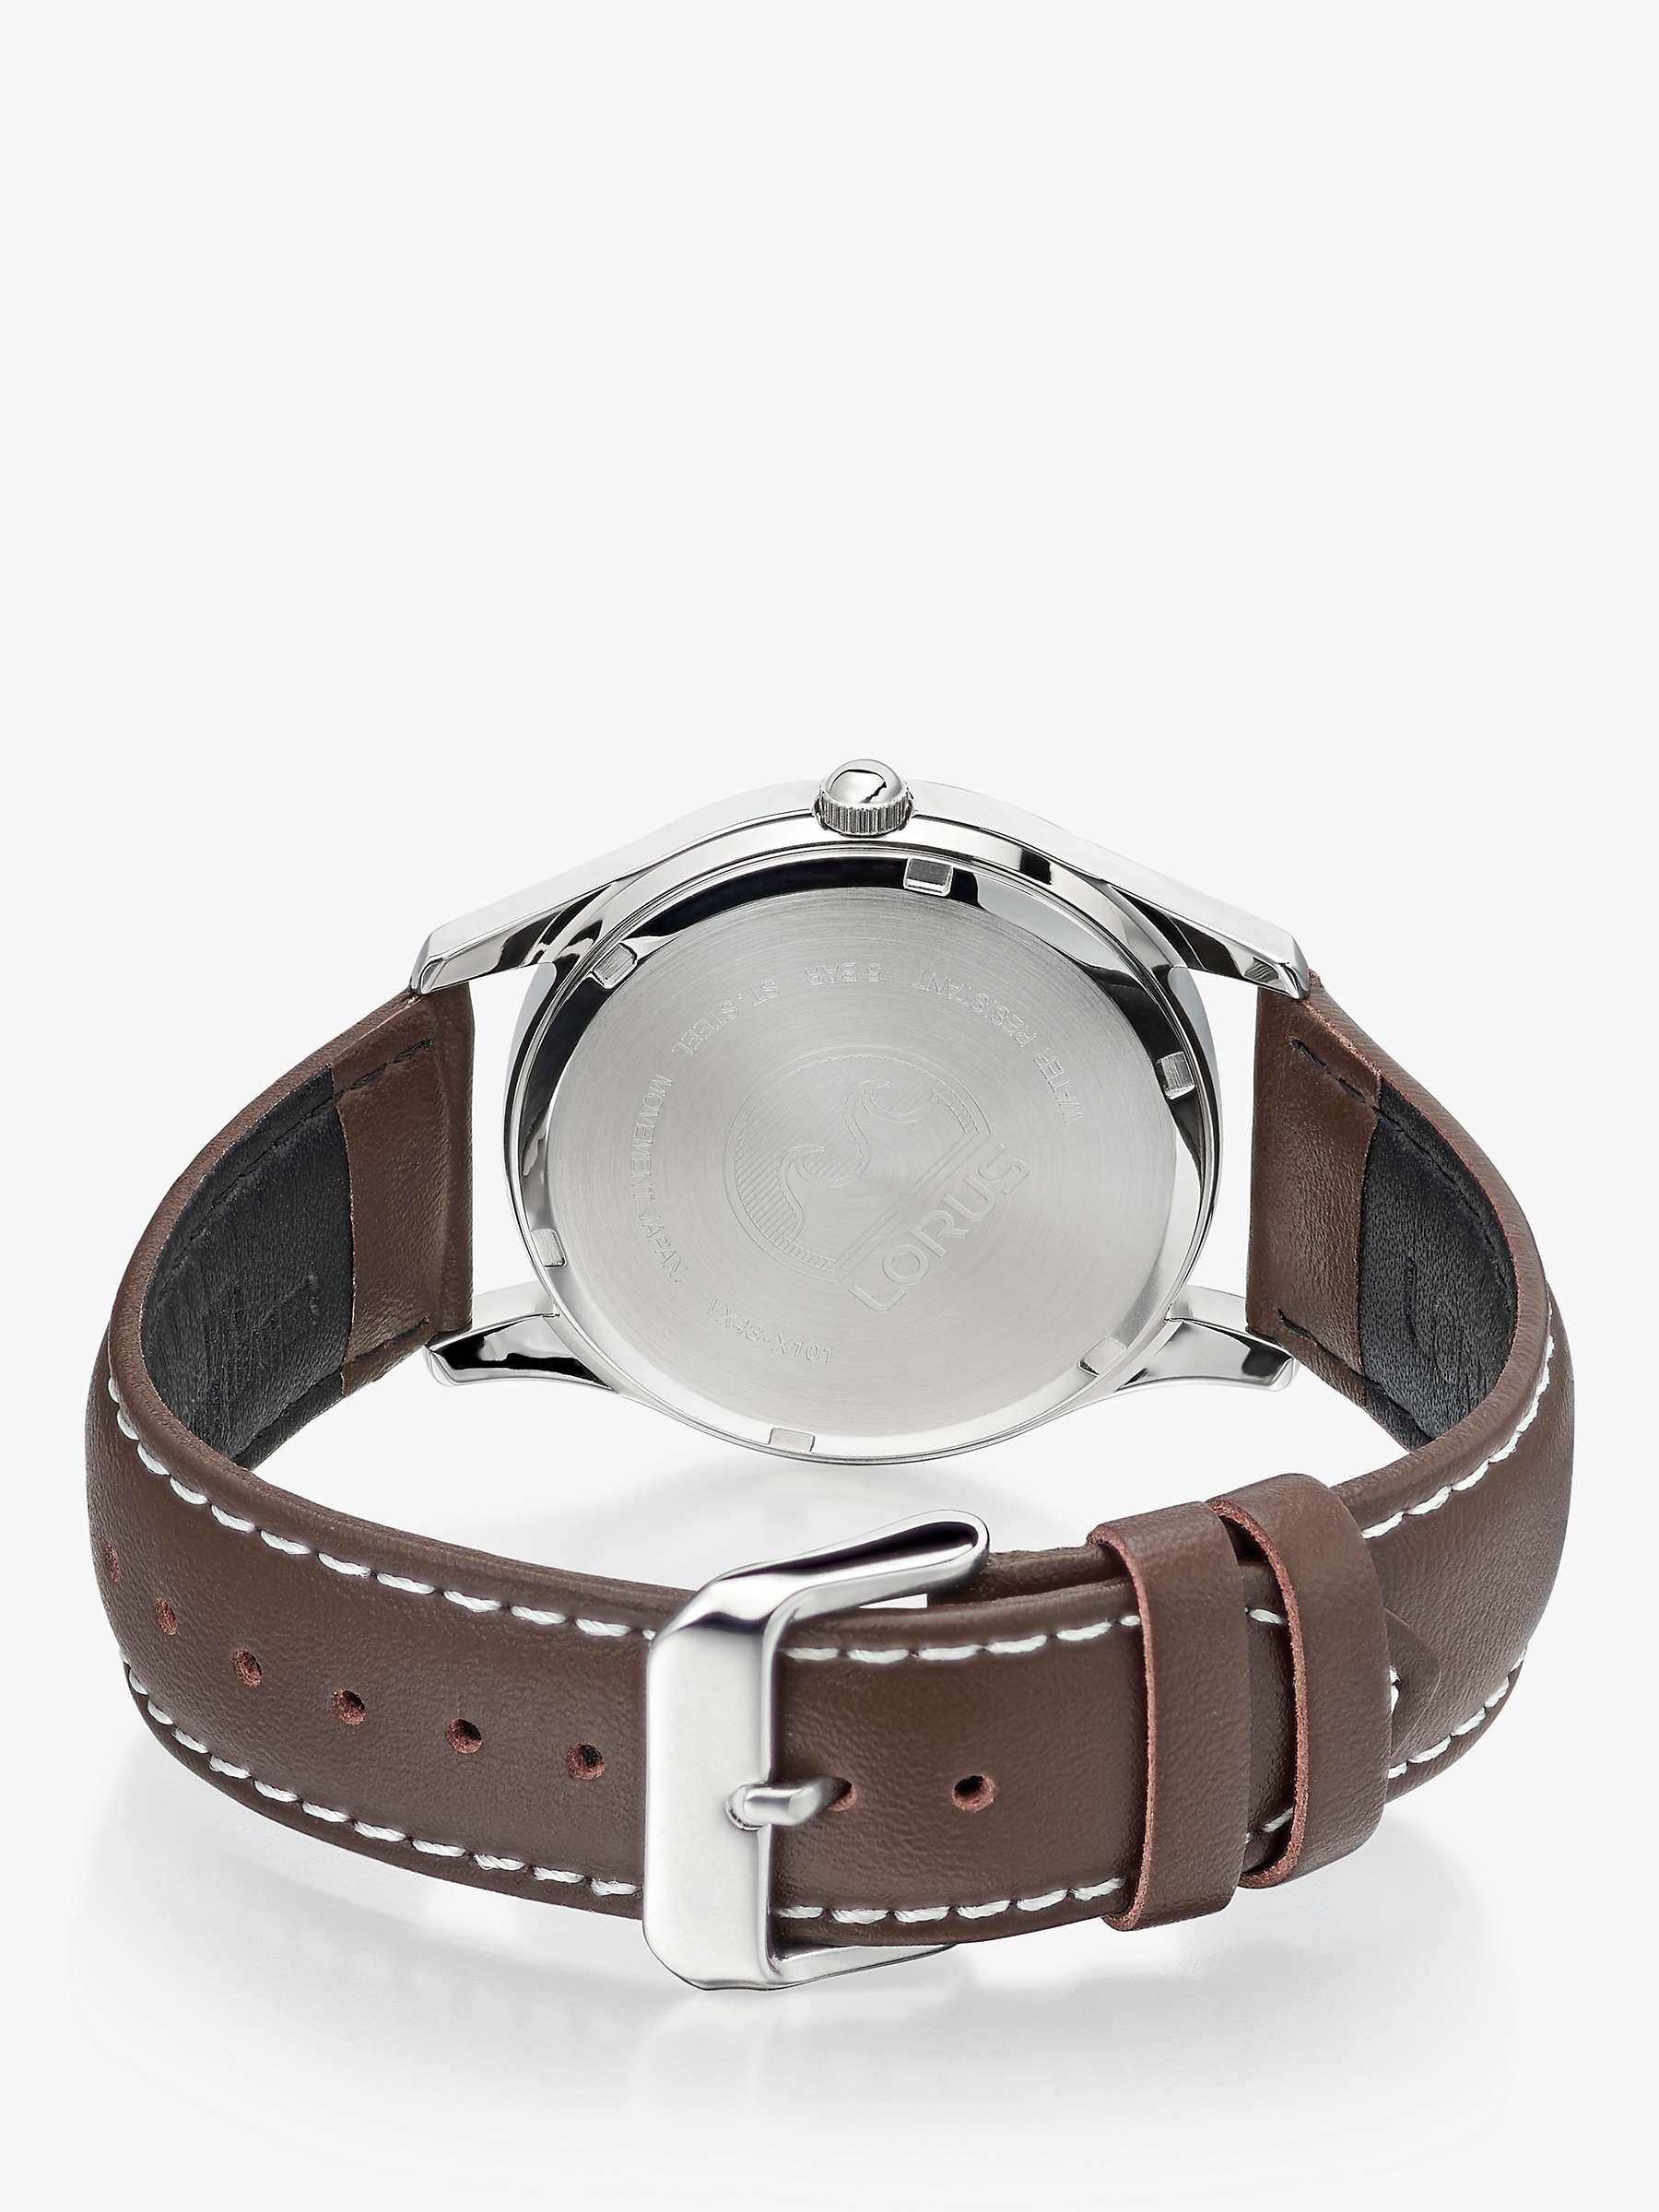 Buy Lorus RXN81DX9 Men's Classic Day Date Leather Strap Watch, Brown/Blue Online at johnlewis.com